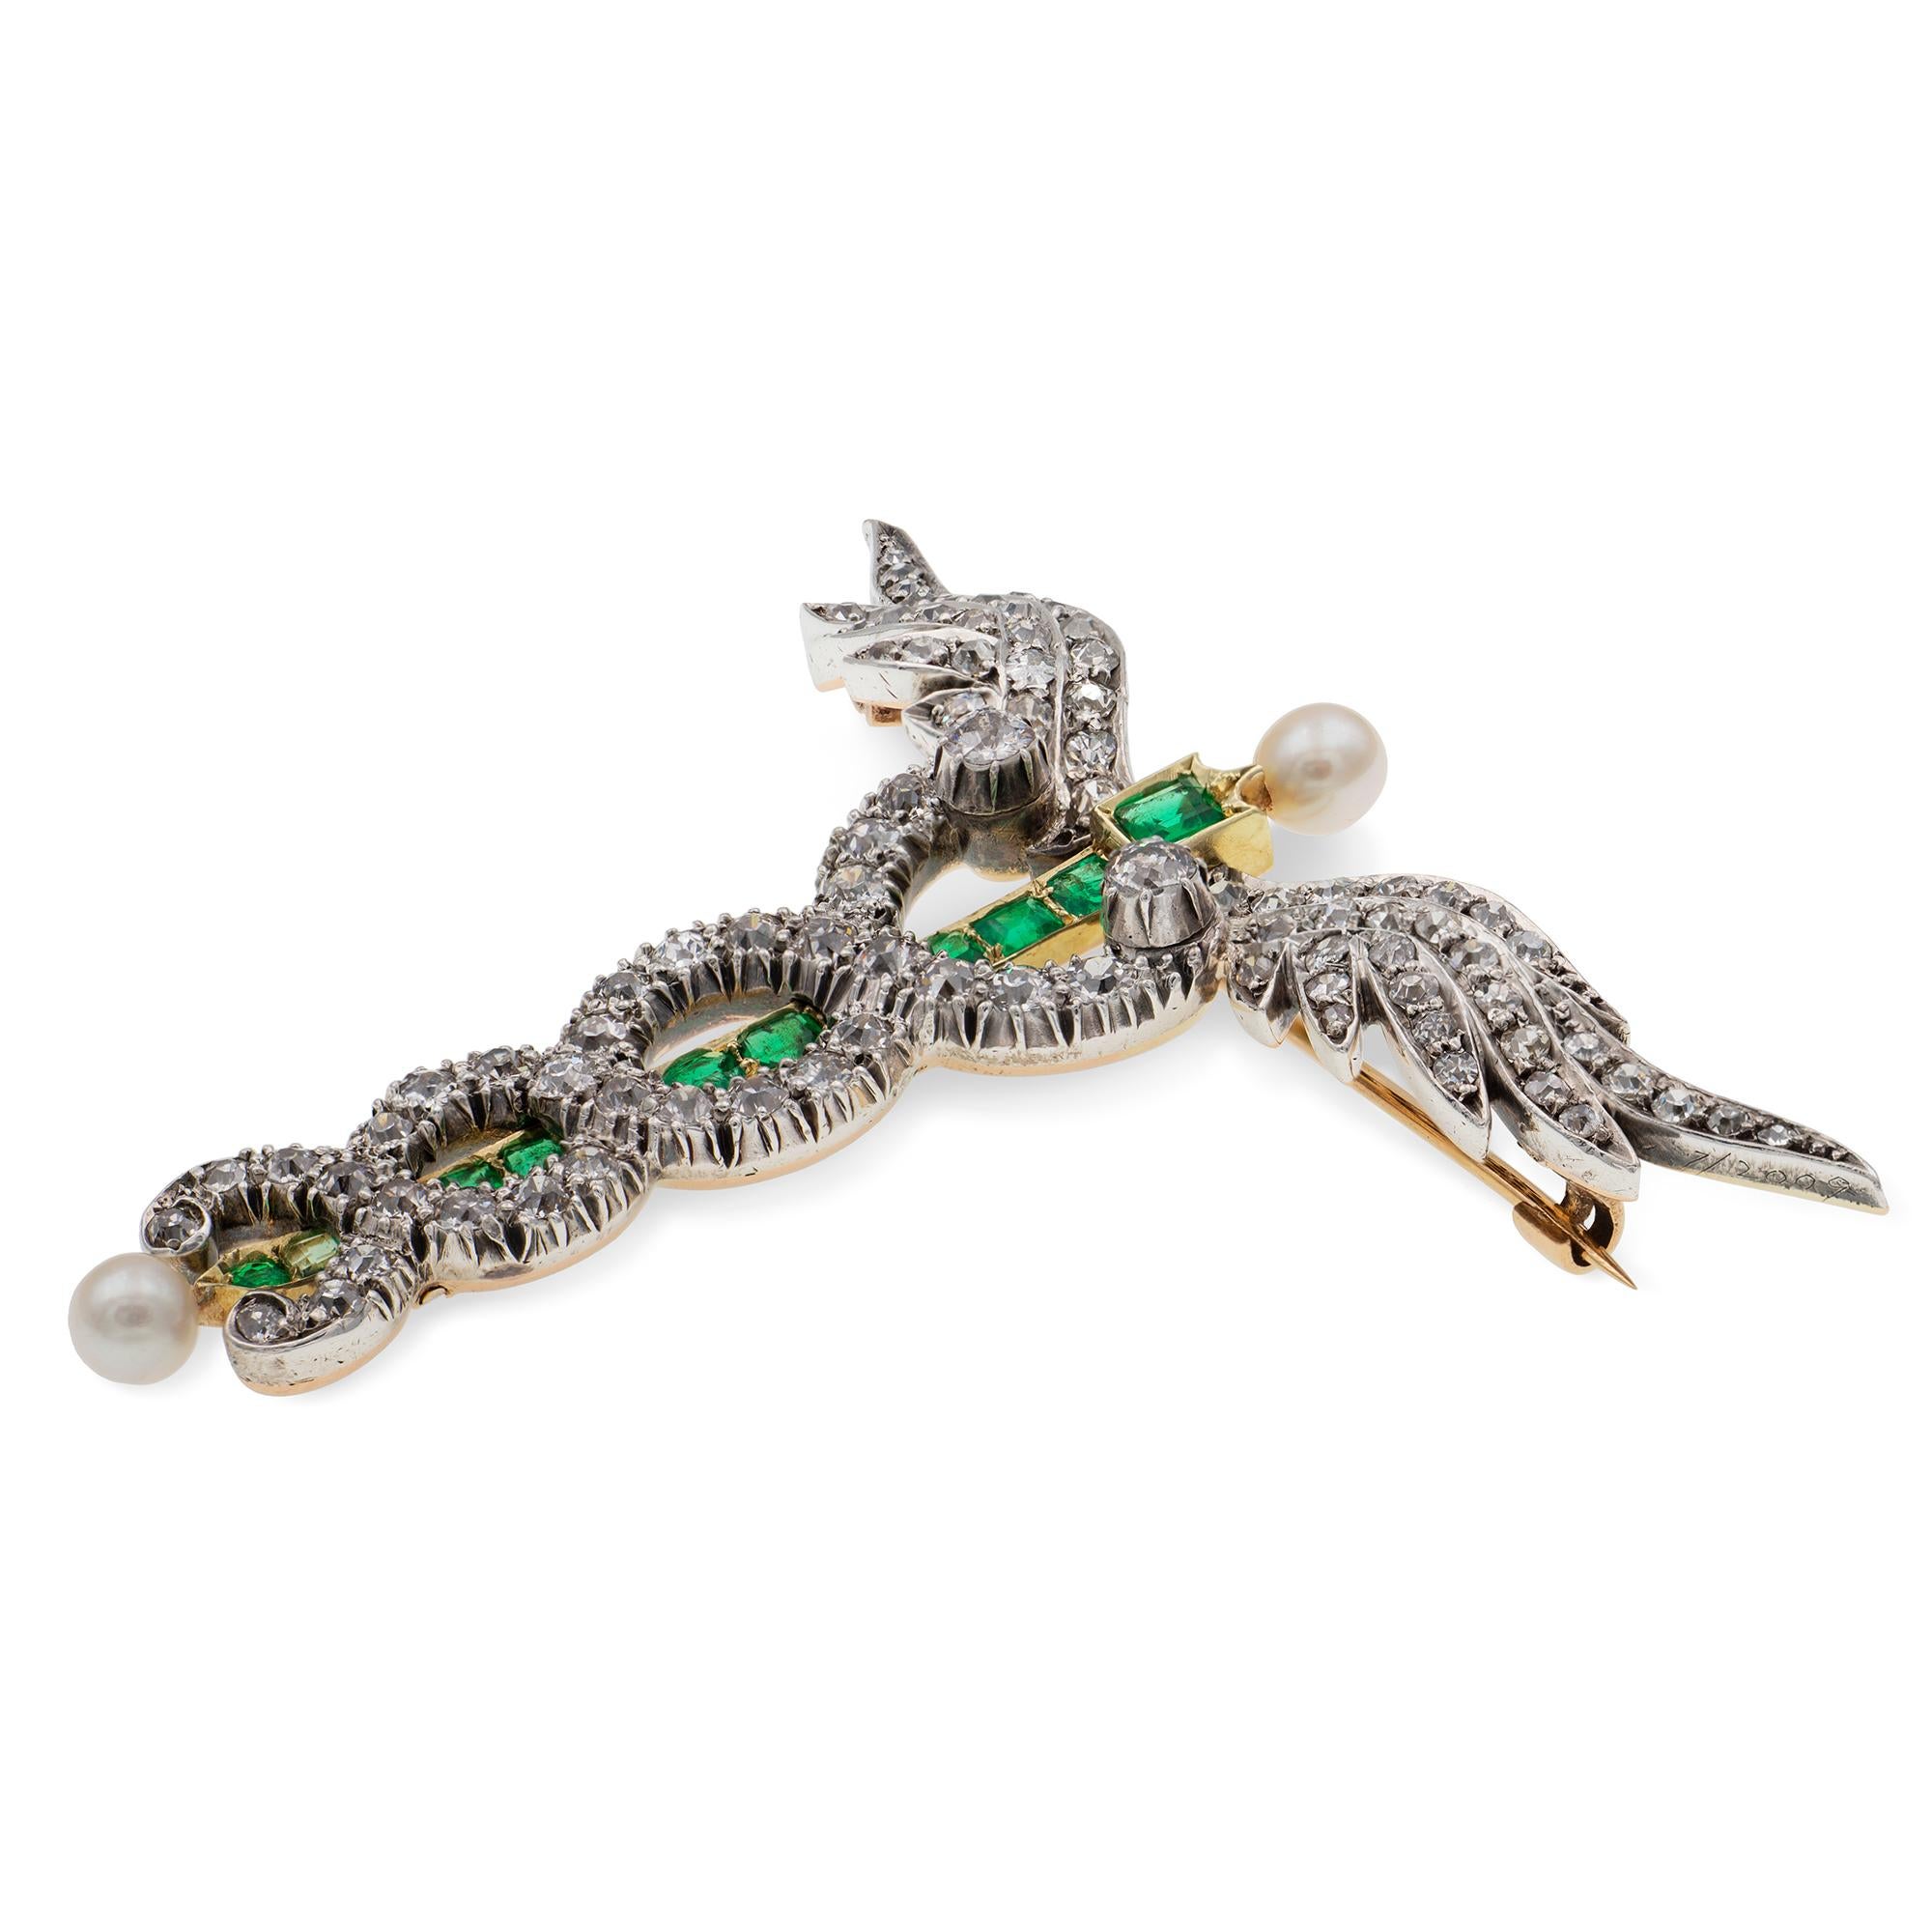 A Victorian diamond, emerald and pearl caduceus brooch, the staff set with ten faceted emeralds estimated to weigh a total of 0.8 carats mounted in 18ct yellow gold, terminating to a round pearl on each end, the entwined serpents and the wings